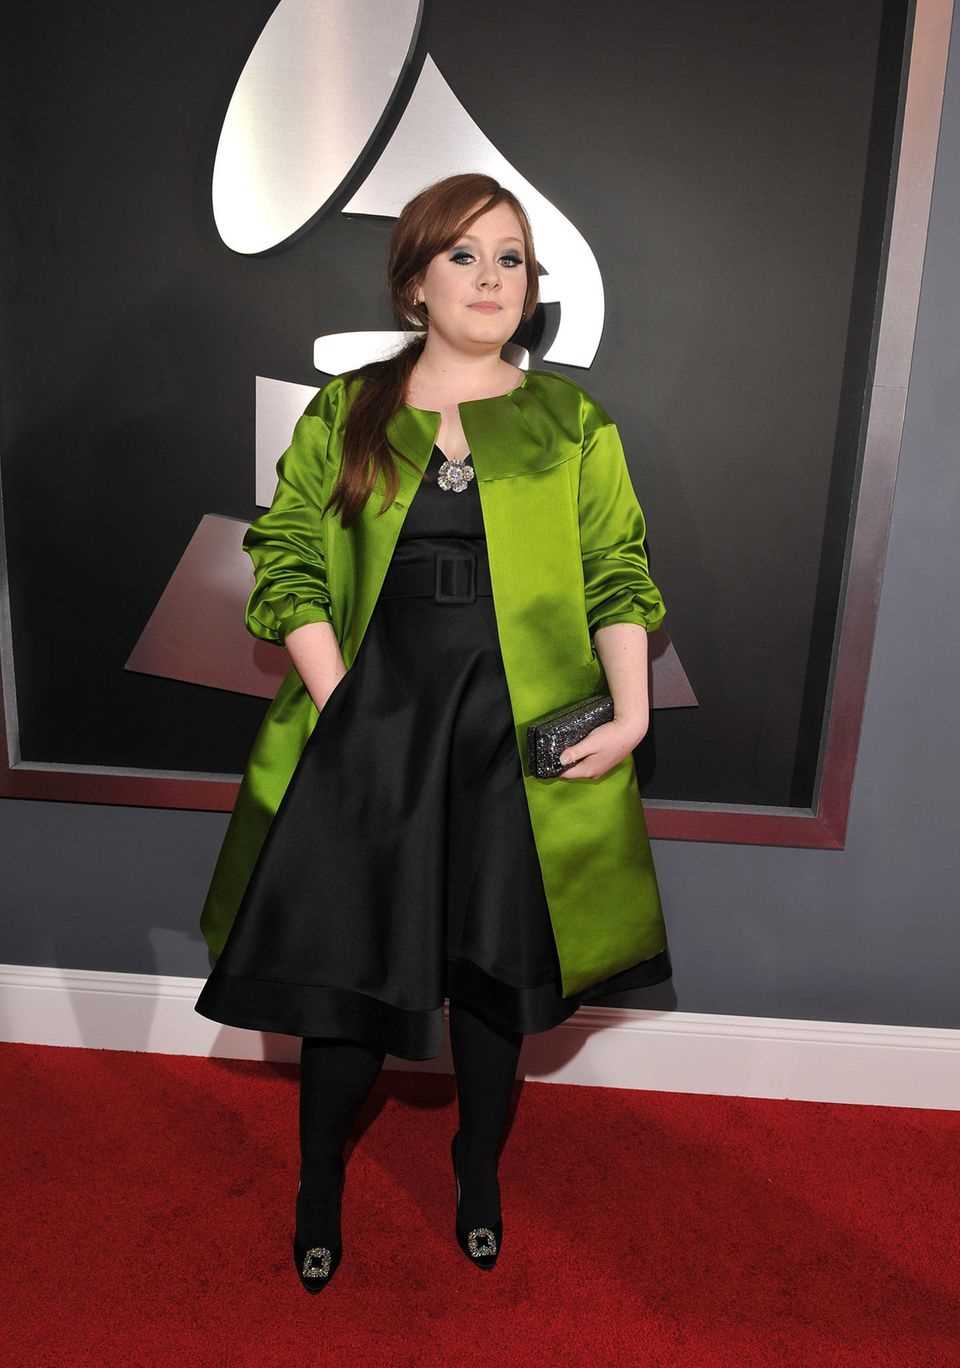 Adele at the 2009 Grammys in Los Angeles.